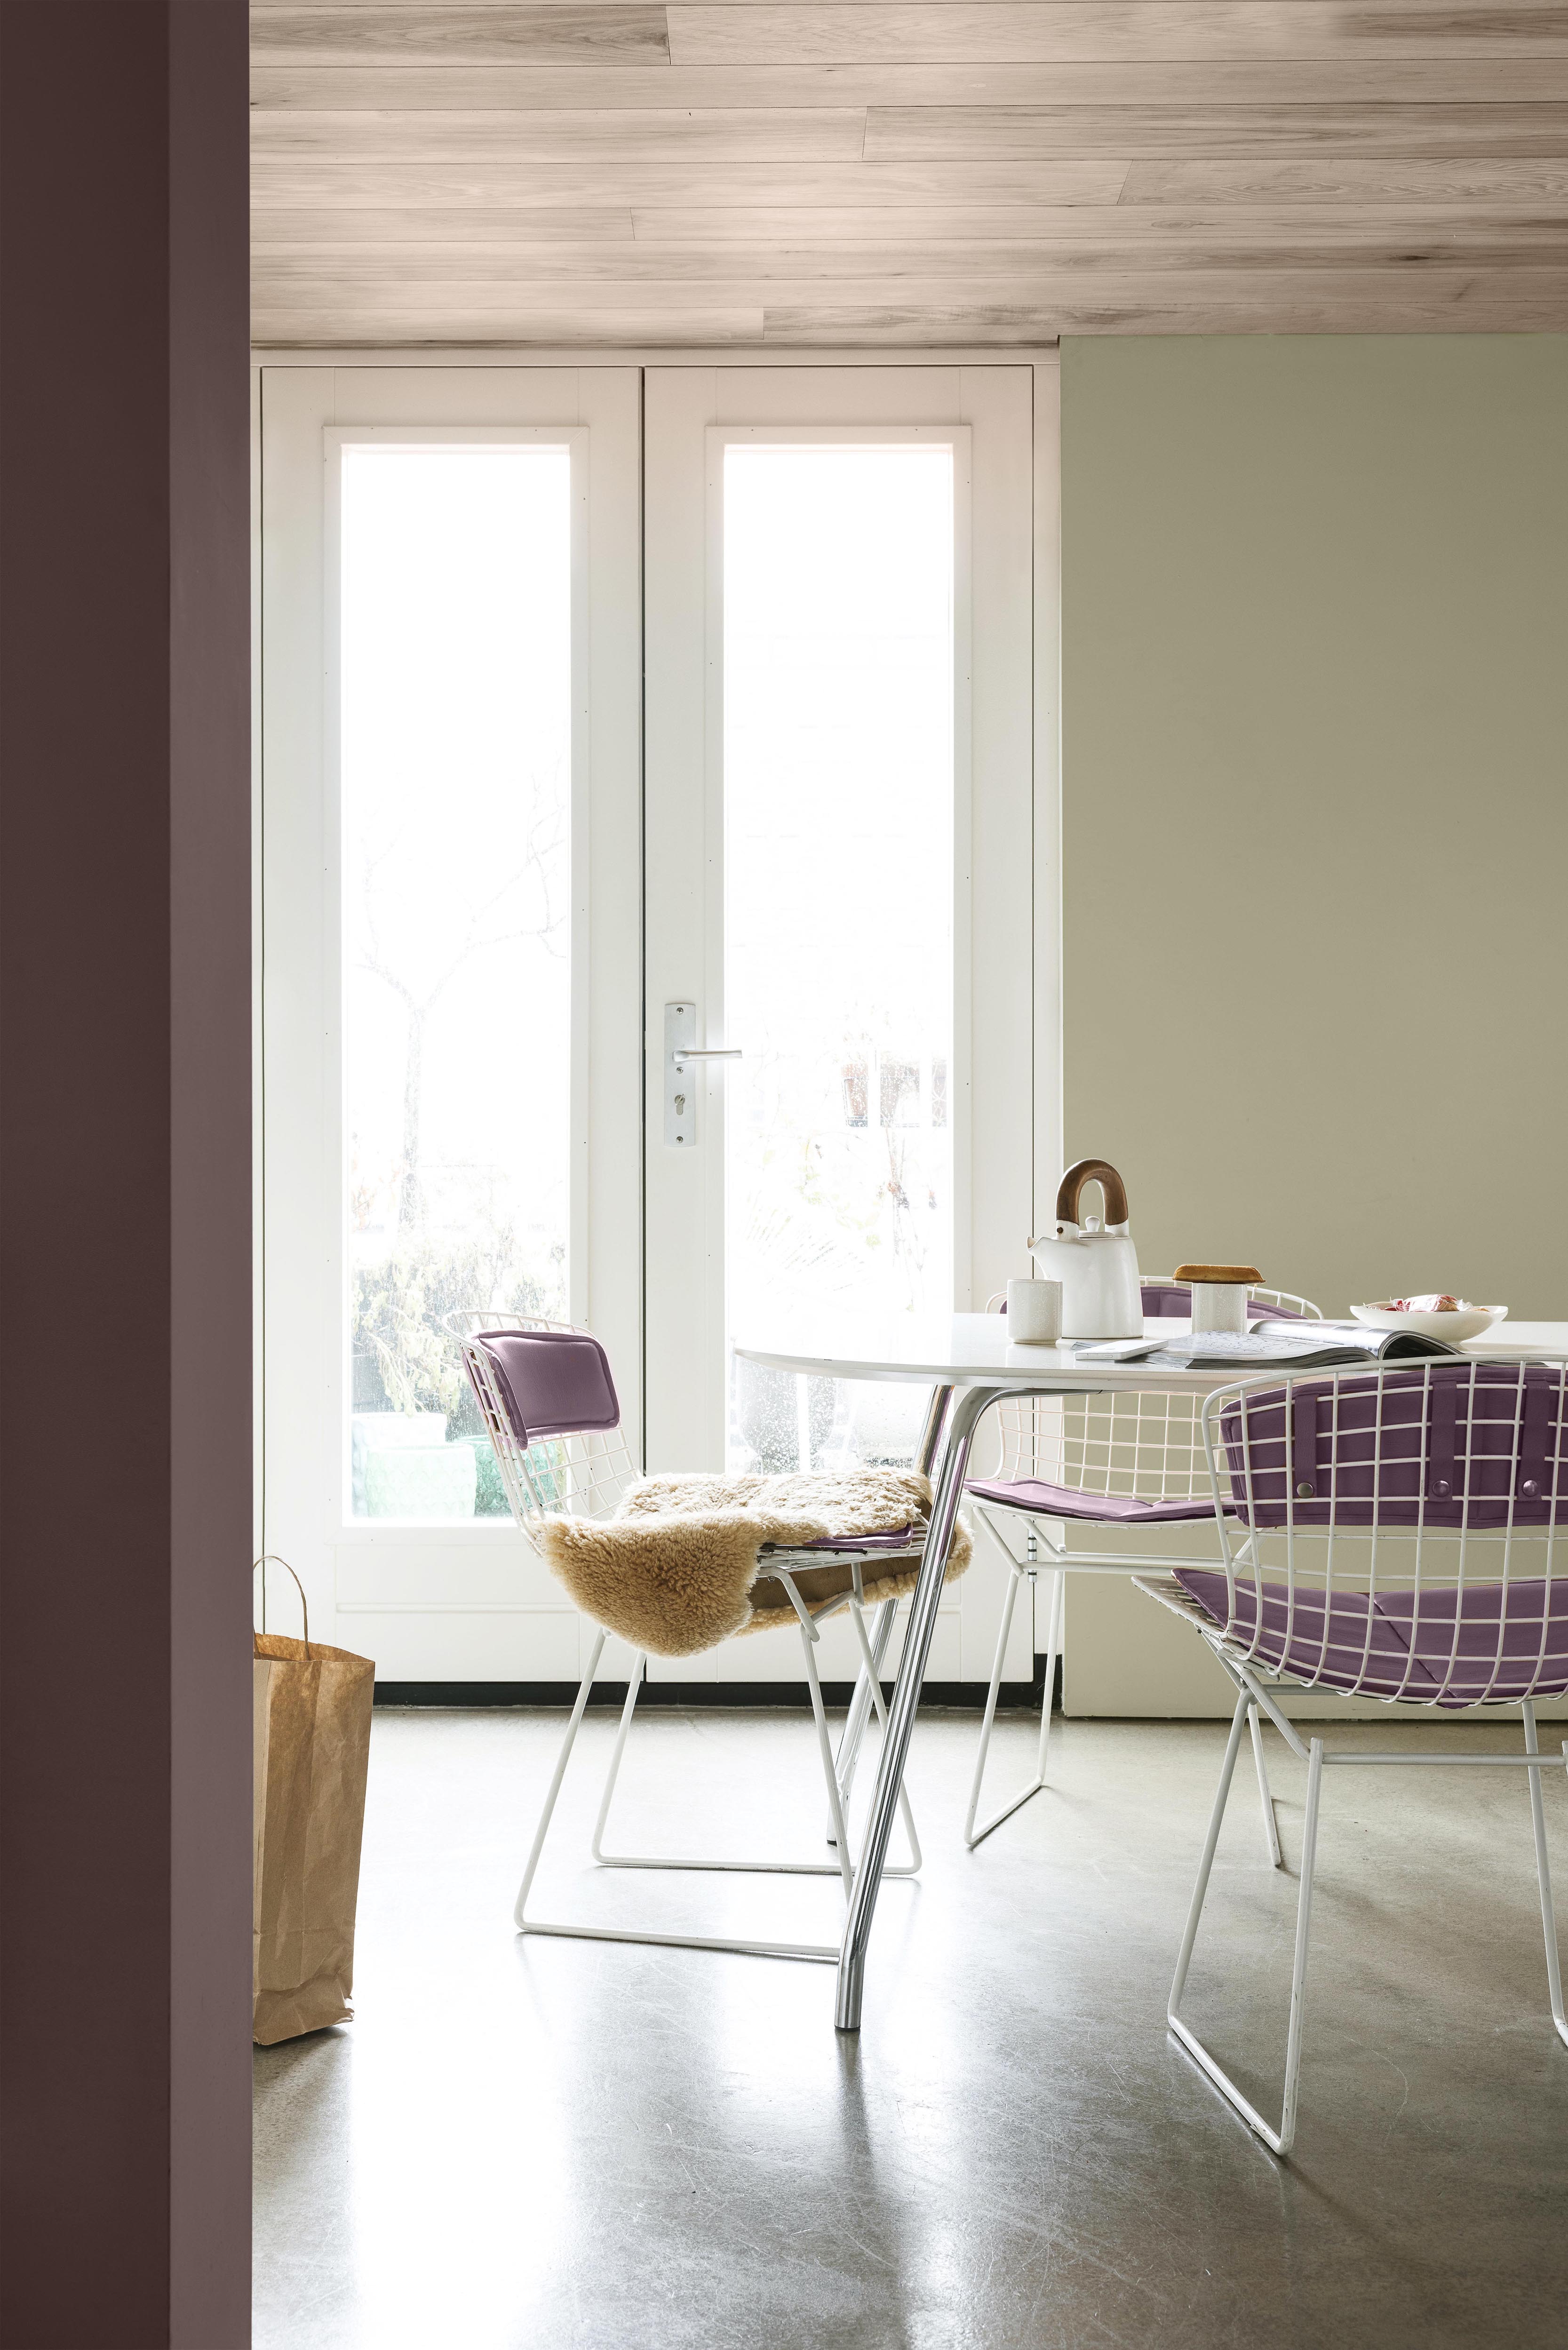 Dulux Colour of the Year 2018 - Heart Wood